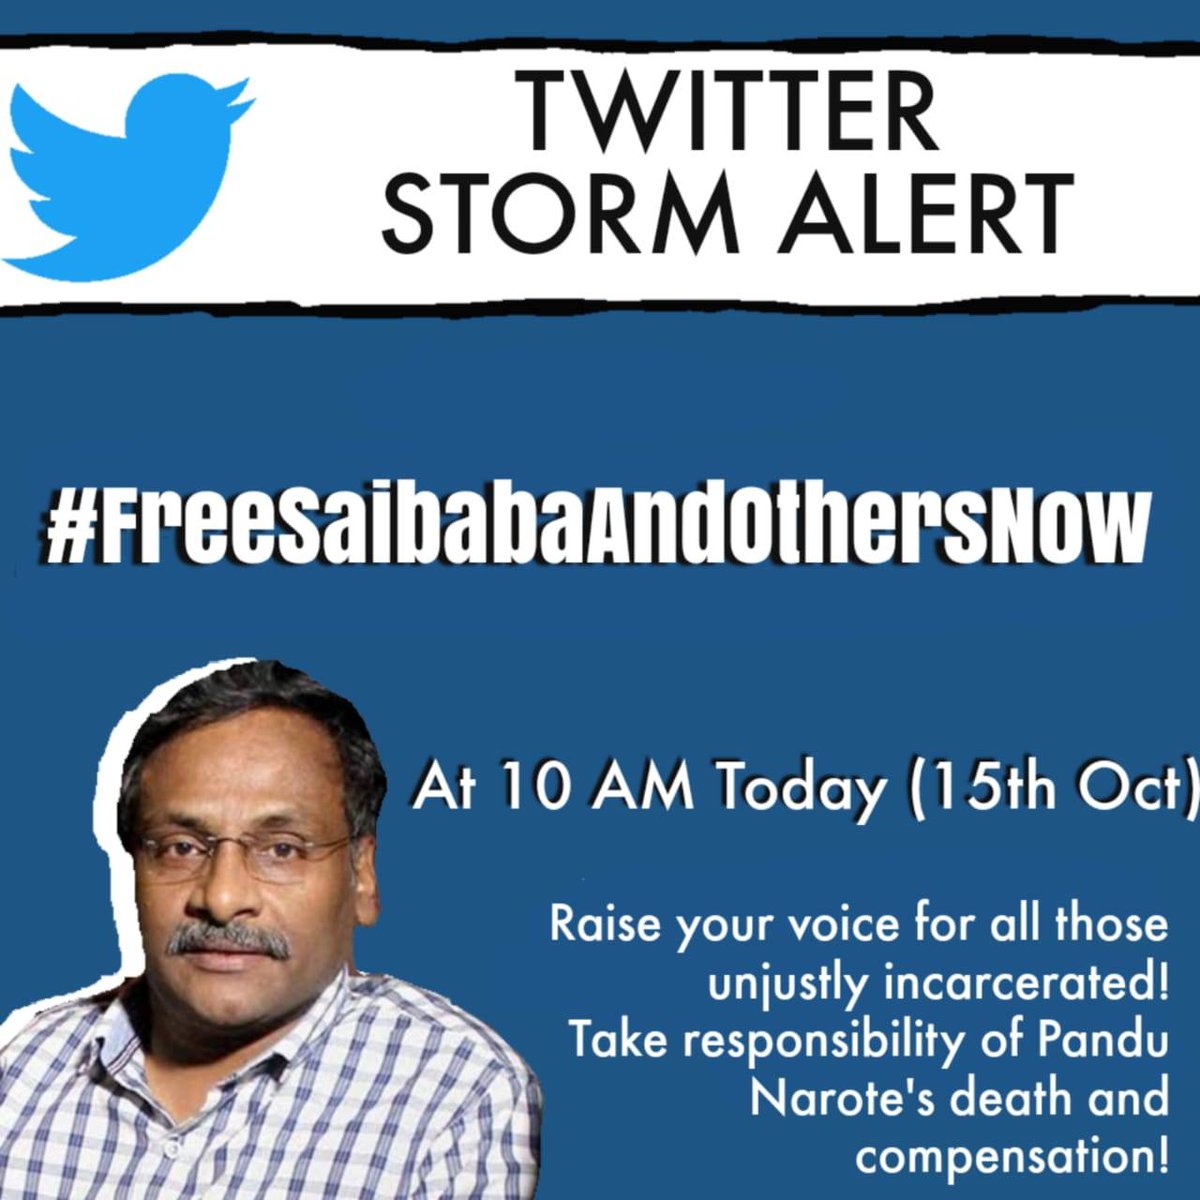 After all these years, the Nagpur Bench of Mumbai HC has acquitted Prof. Saibaba and 5 others. It would be a travesty of justice if the Order is now set aside. Let them breathe fresh air. Join the demand of democratic groups & citizens to #FreeSaibabaAndOthersNow from 10 am.